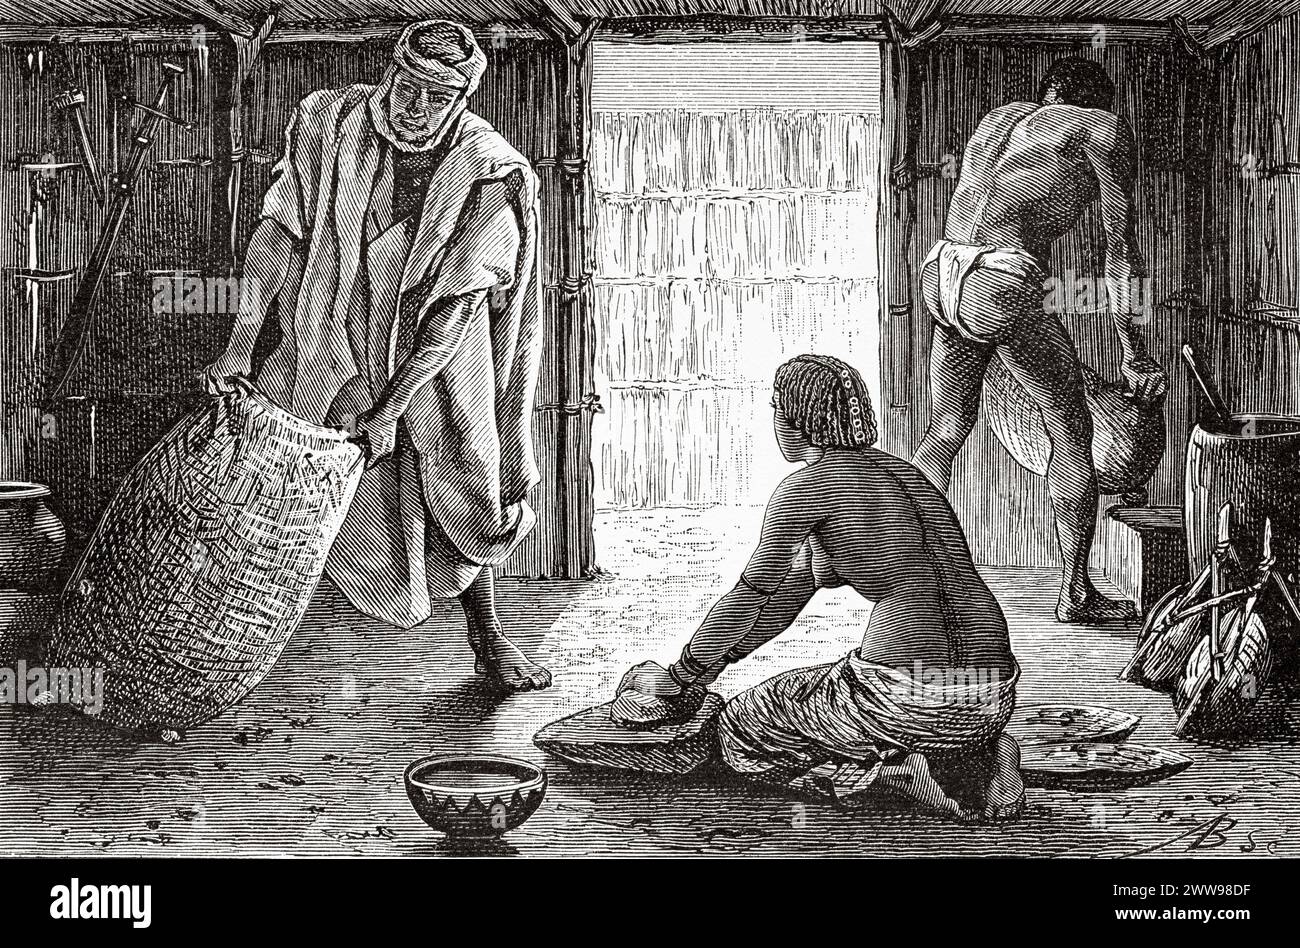 Interior of a traditional hut, Tibesti Region, Chad, Africa. Drawing by Ivan Pranishnikoff (1841 - 1909) Two months in Tibesti, episodes from travels in Africa 1869-1873 by Dr. Gustav Hermann Nachtigal (1834 - 1885) Le Tour du Monde 1880 Stock Photo